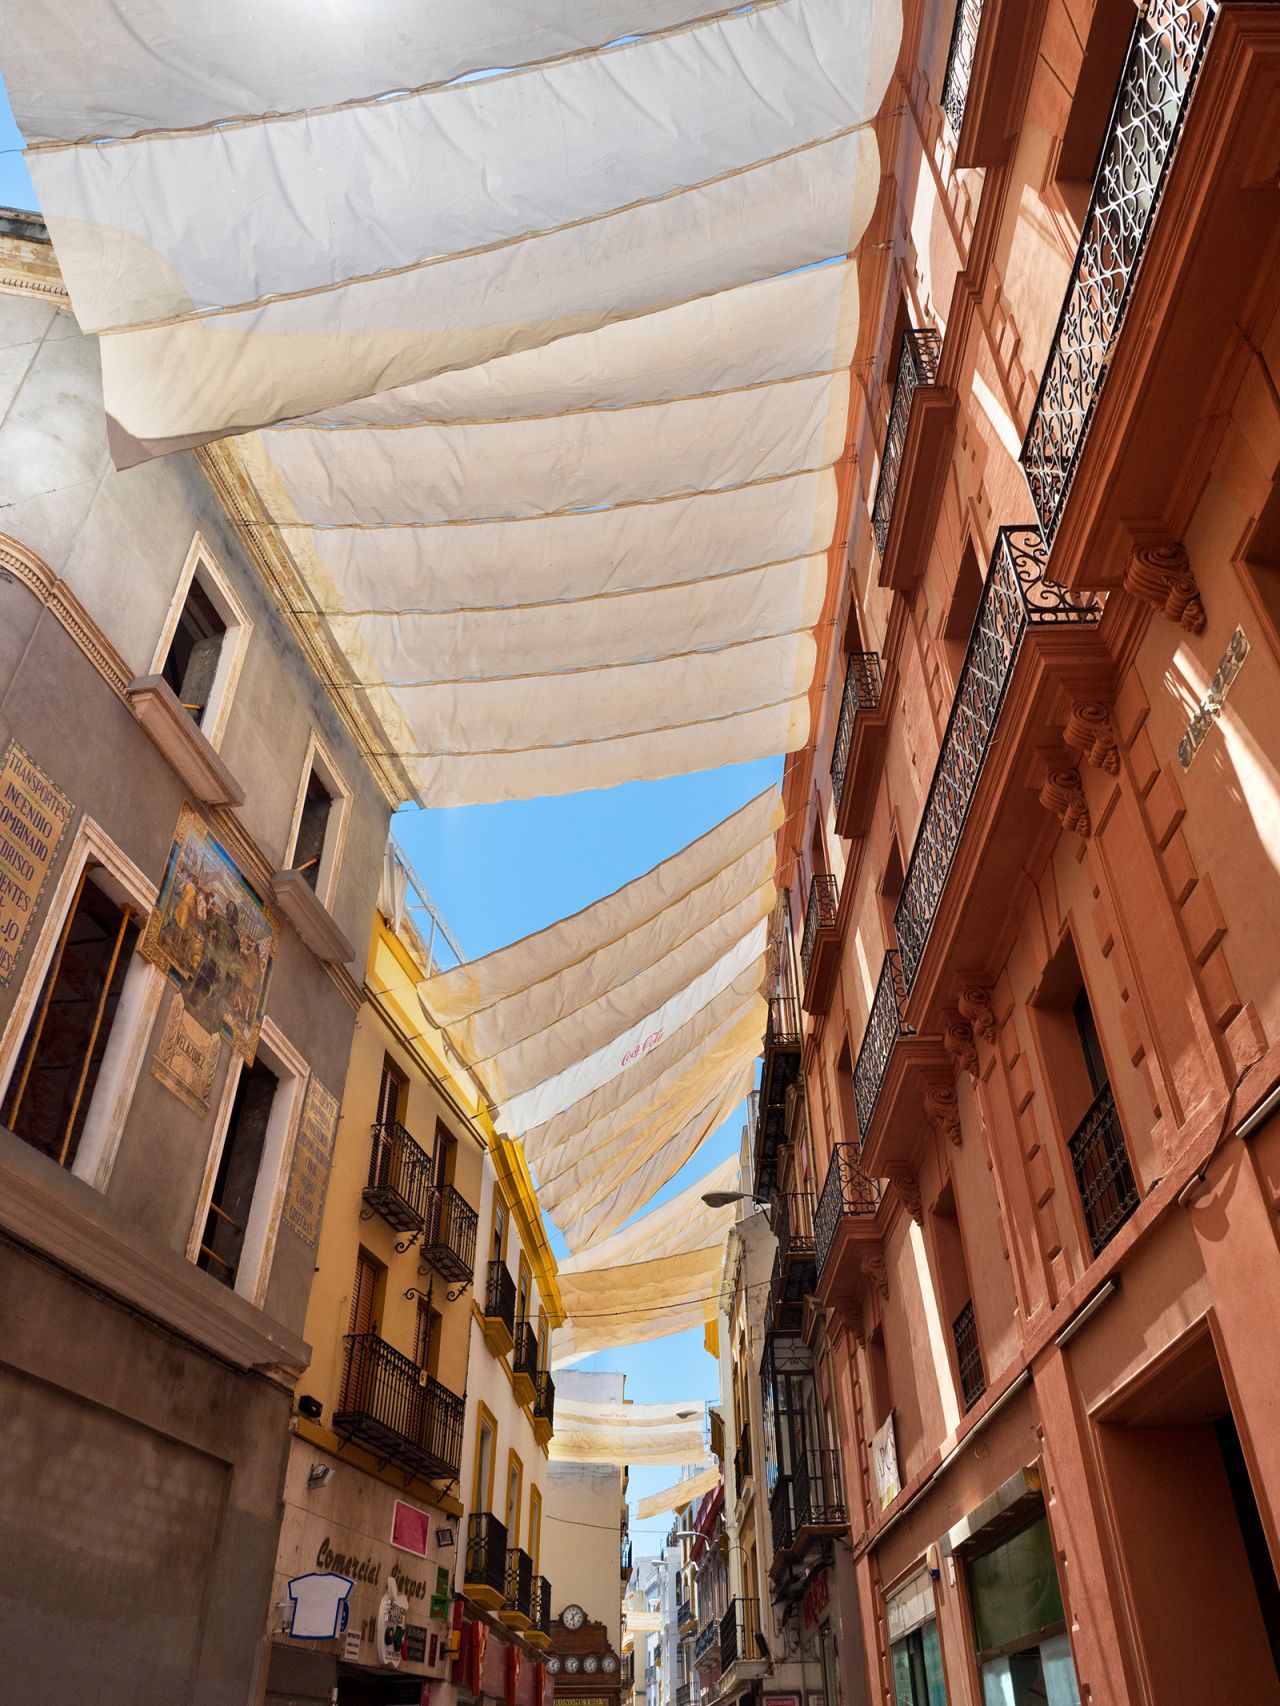 Cloth awnings protect shoppers and pedestrians from the fierce summer sun in Calle Sierpes, a shopping street in Seville, Spain.